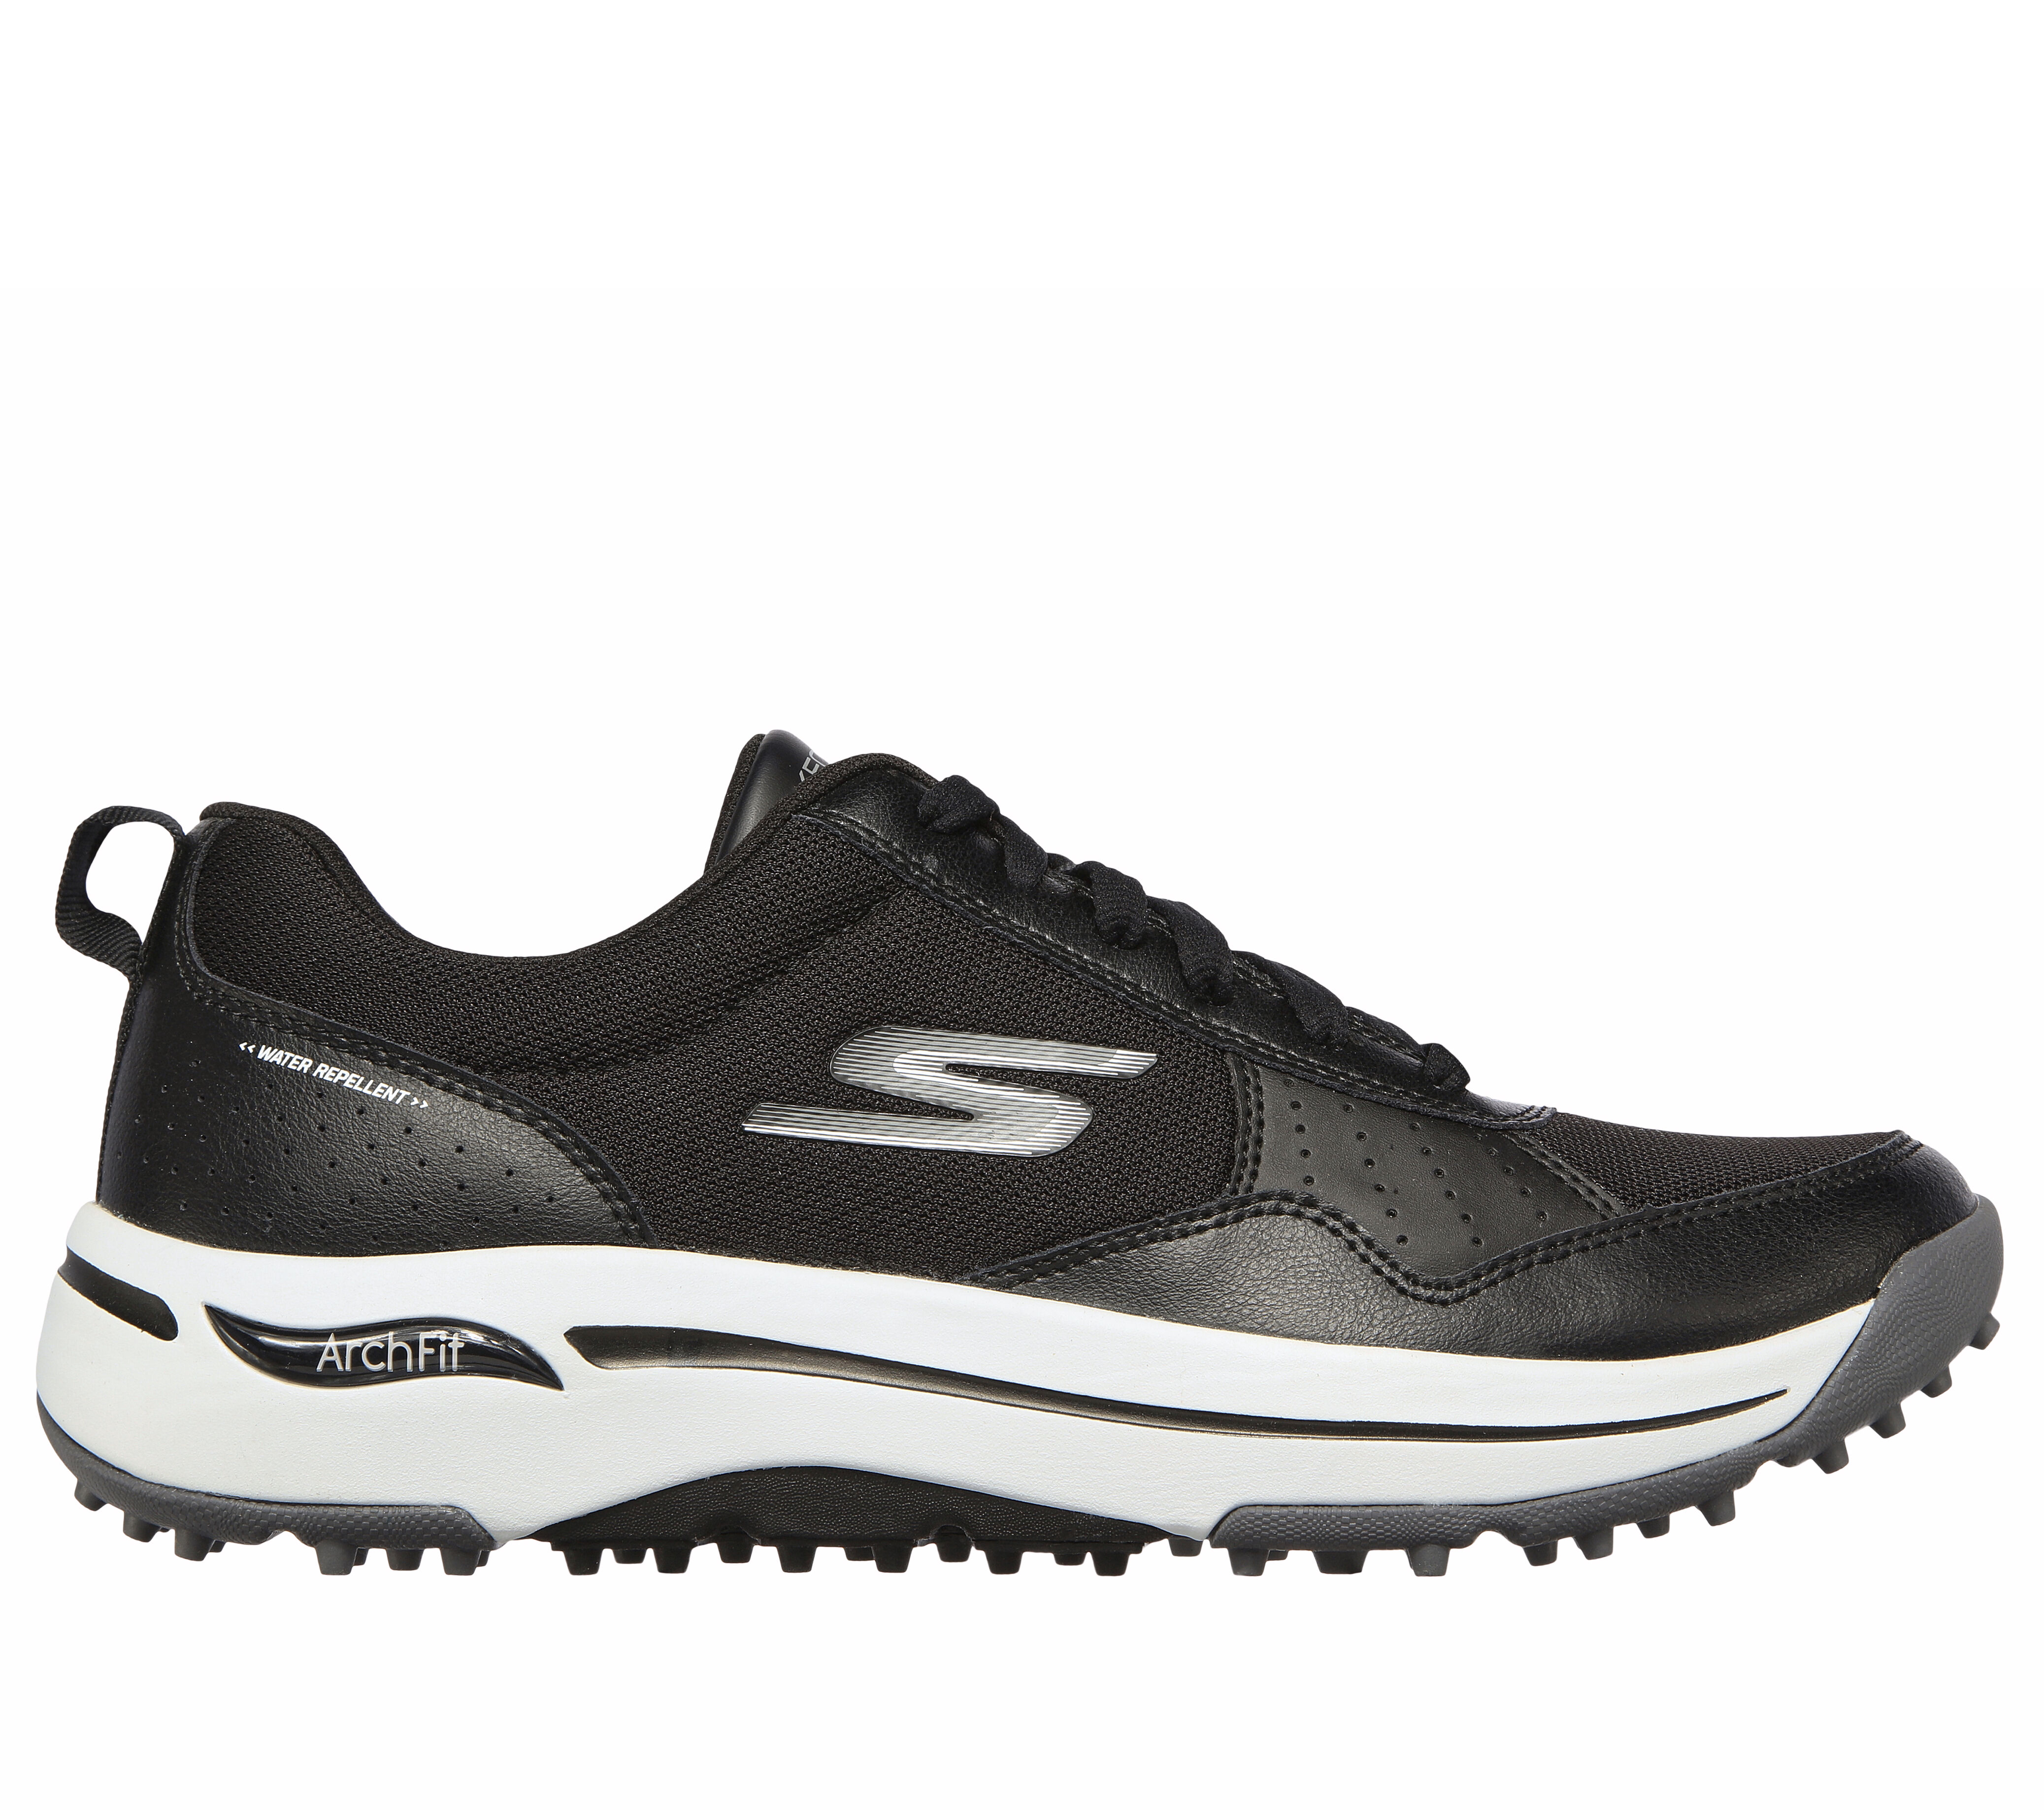 skechers golf shoes size 14